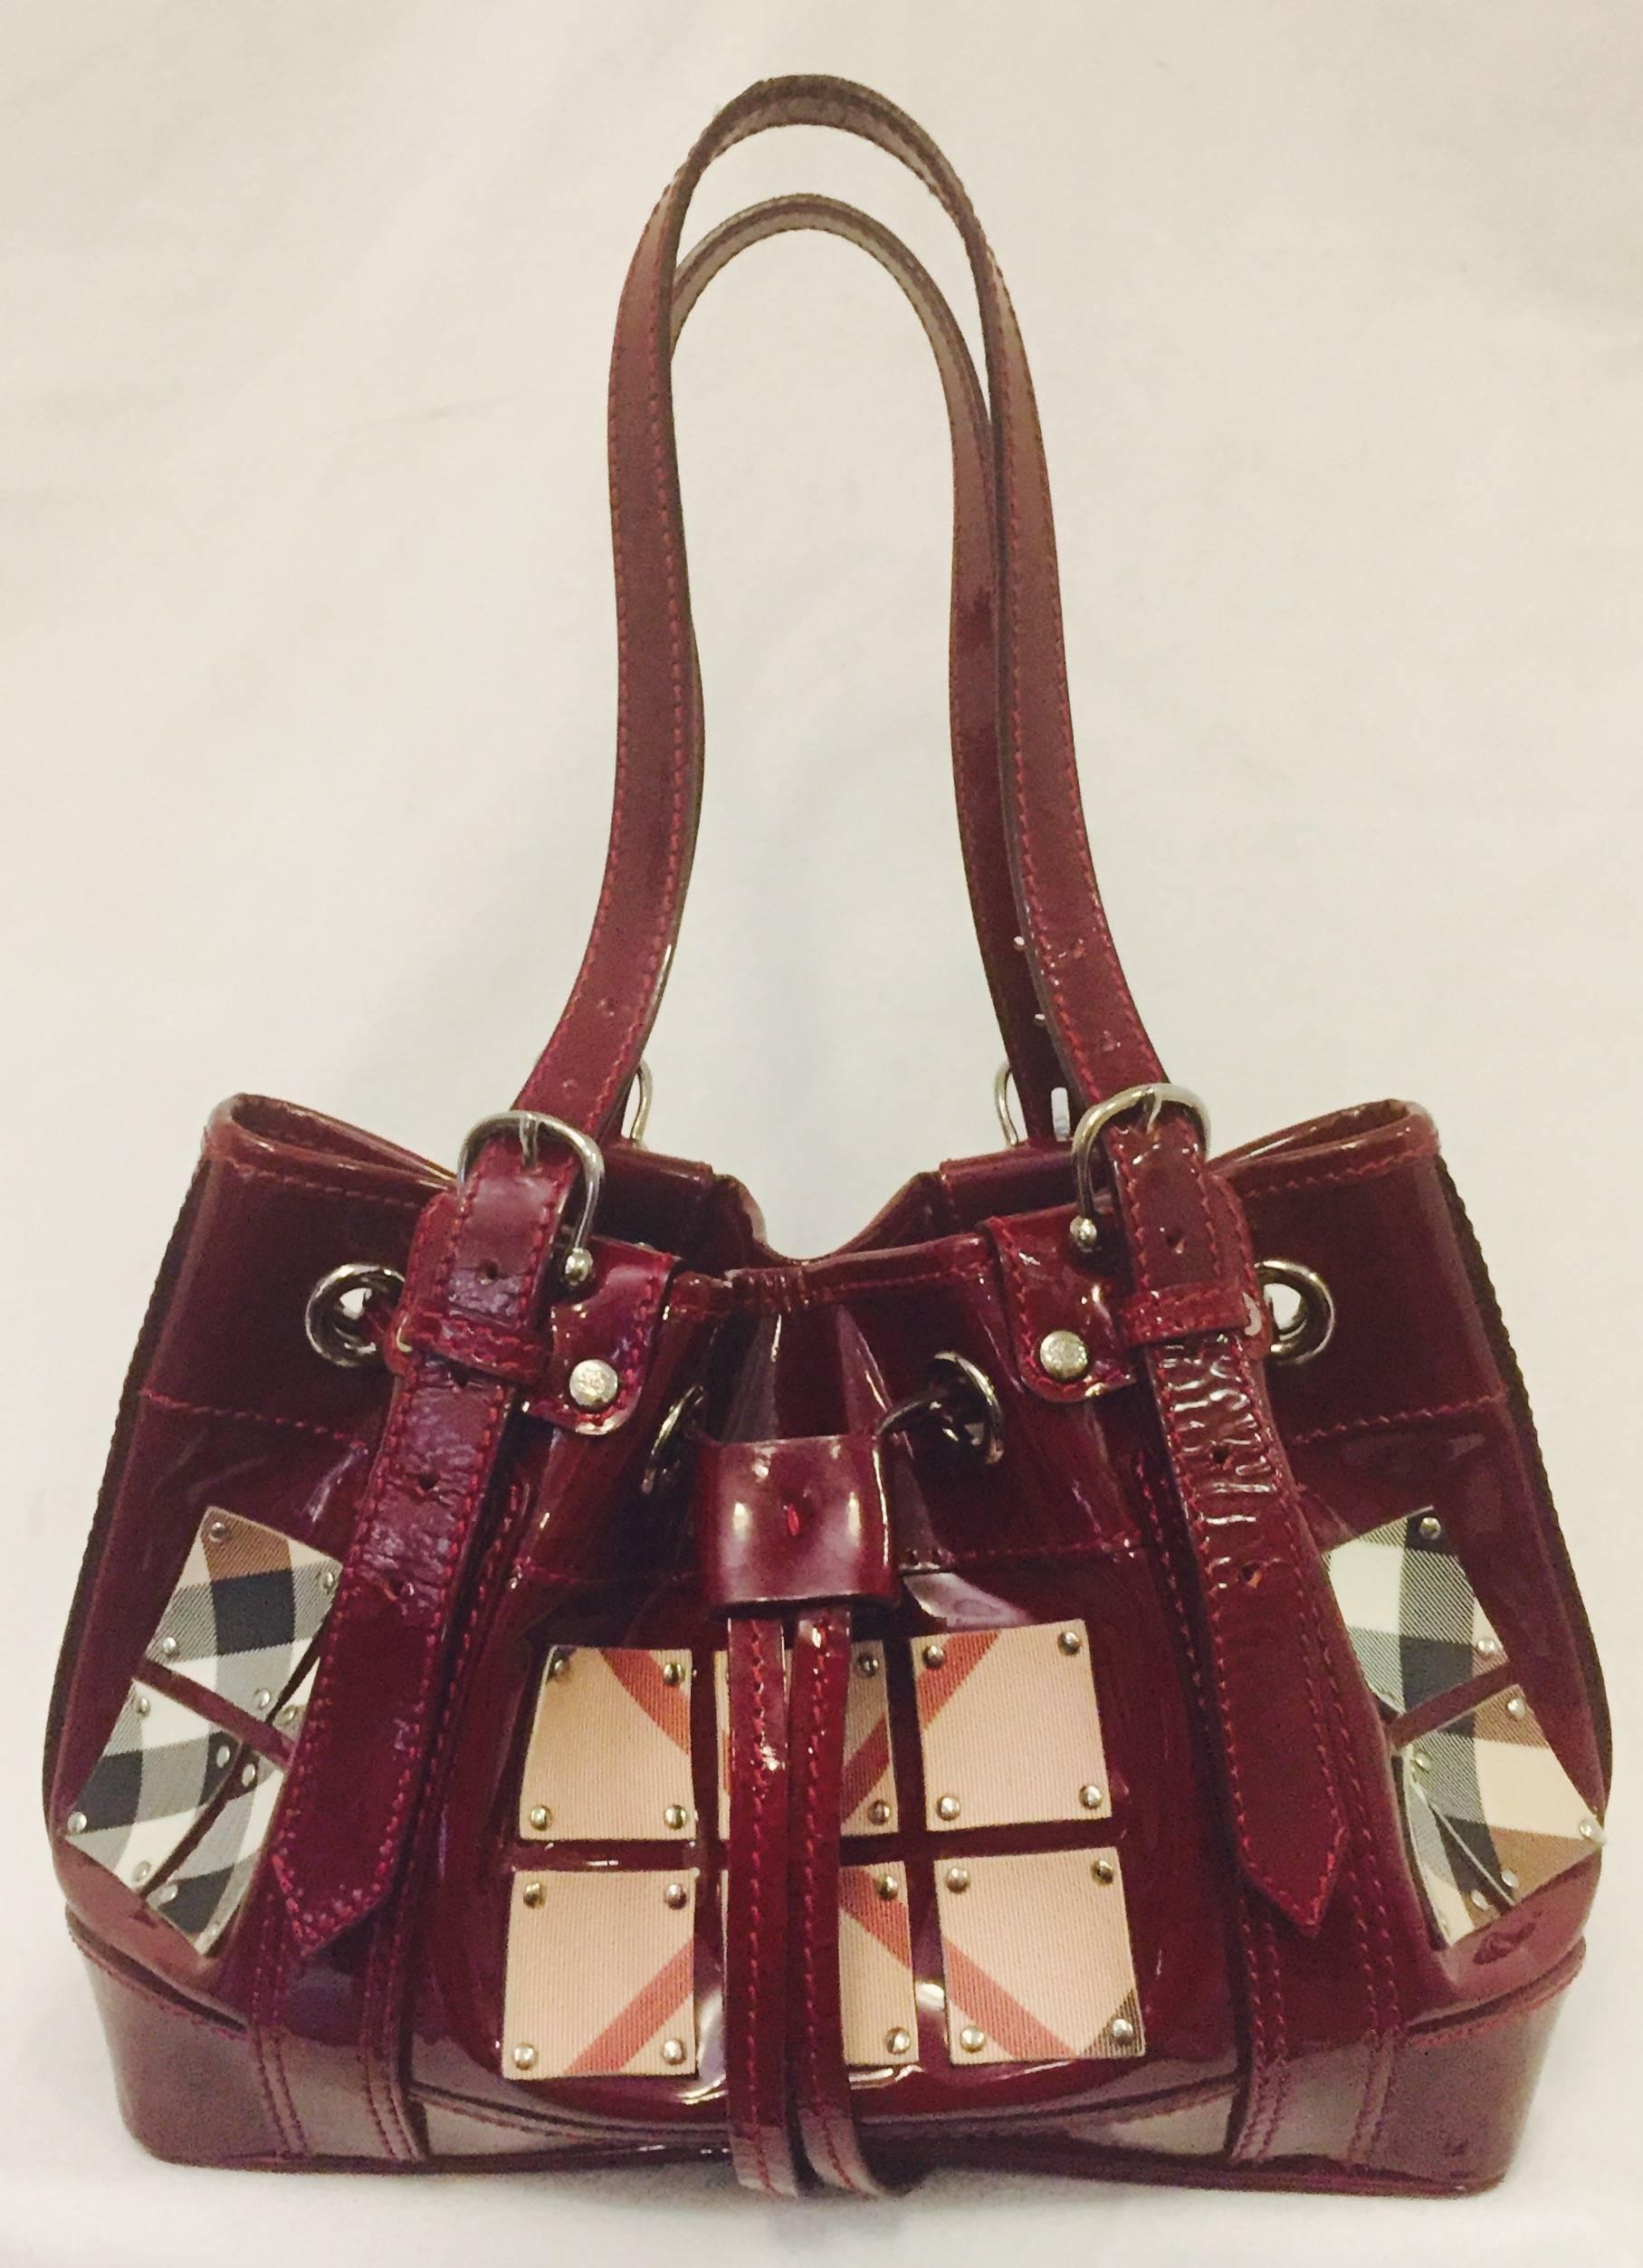 Burberry's Burgundy Large Satchel is decorated with mini coated canvas squares and silver nail studs.  The squares are composed of iconic Burberry 